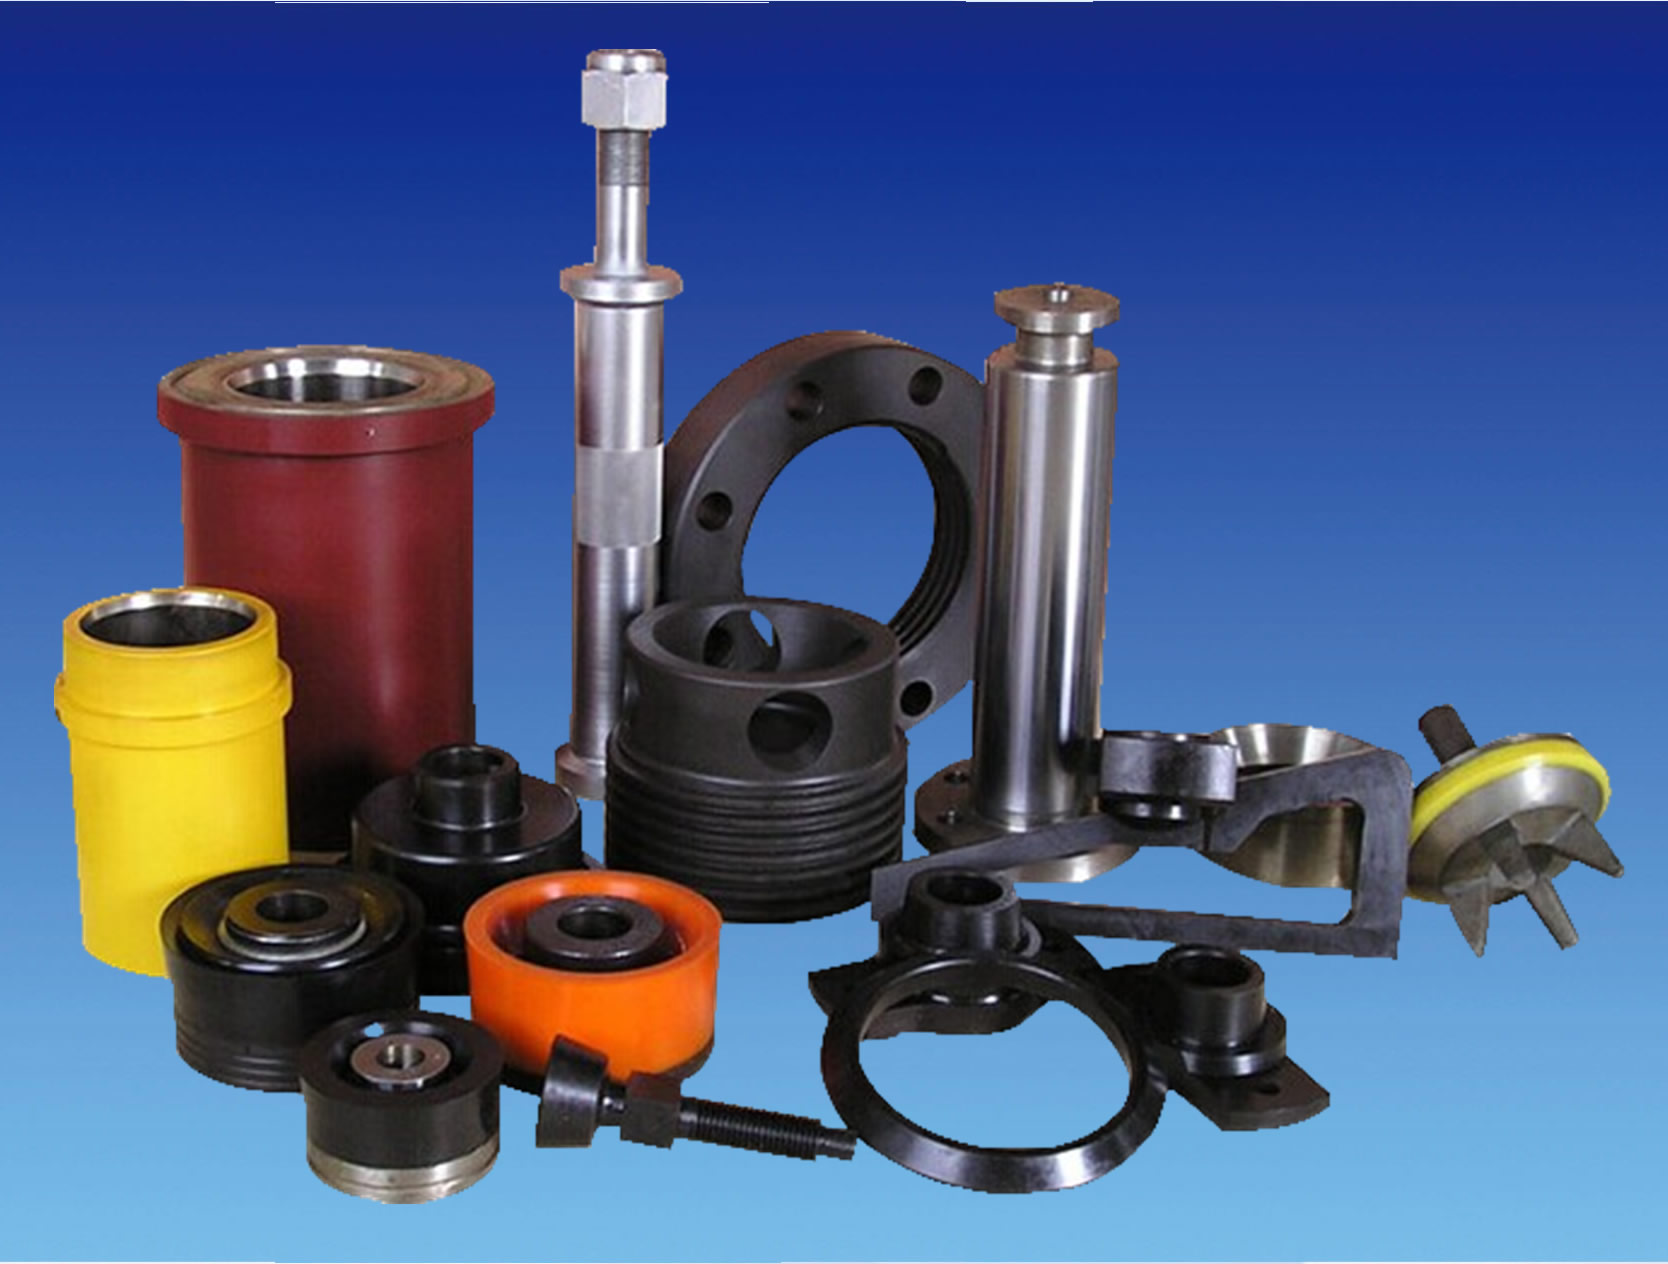 Sinopetrotech supplies wide variety of mud pump fluid end parts, suitable replacements for most popular well service pumps.